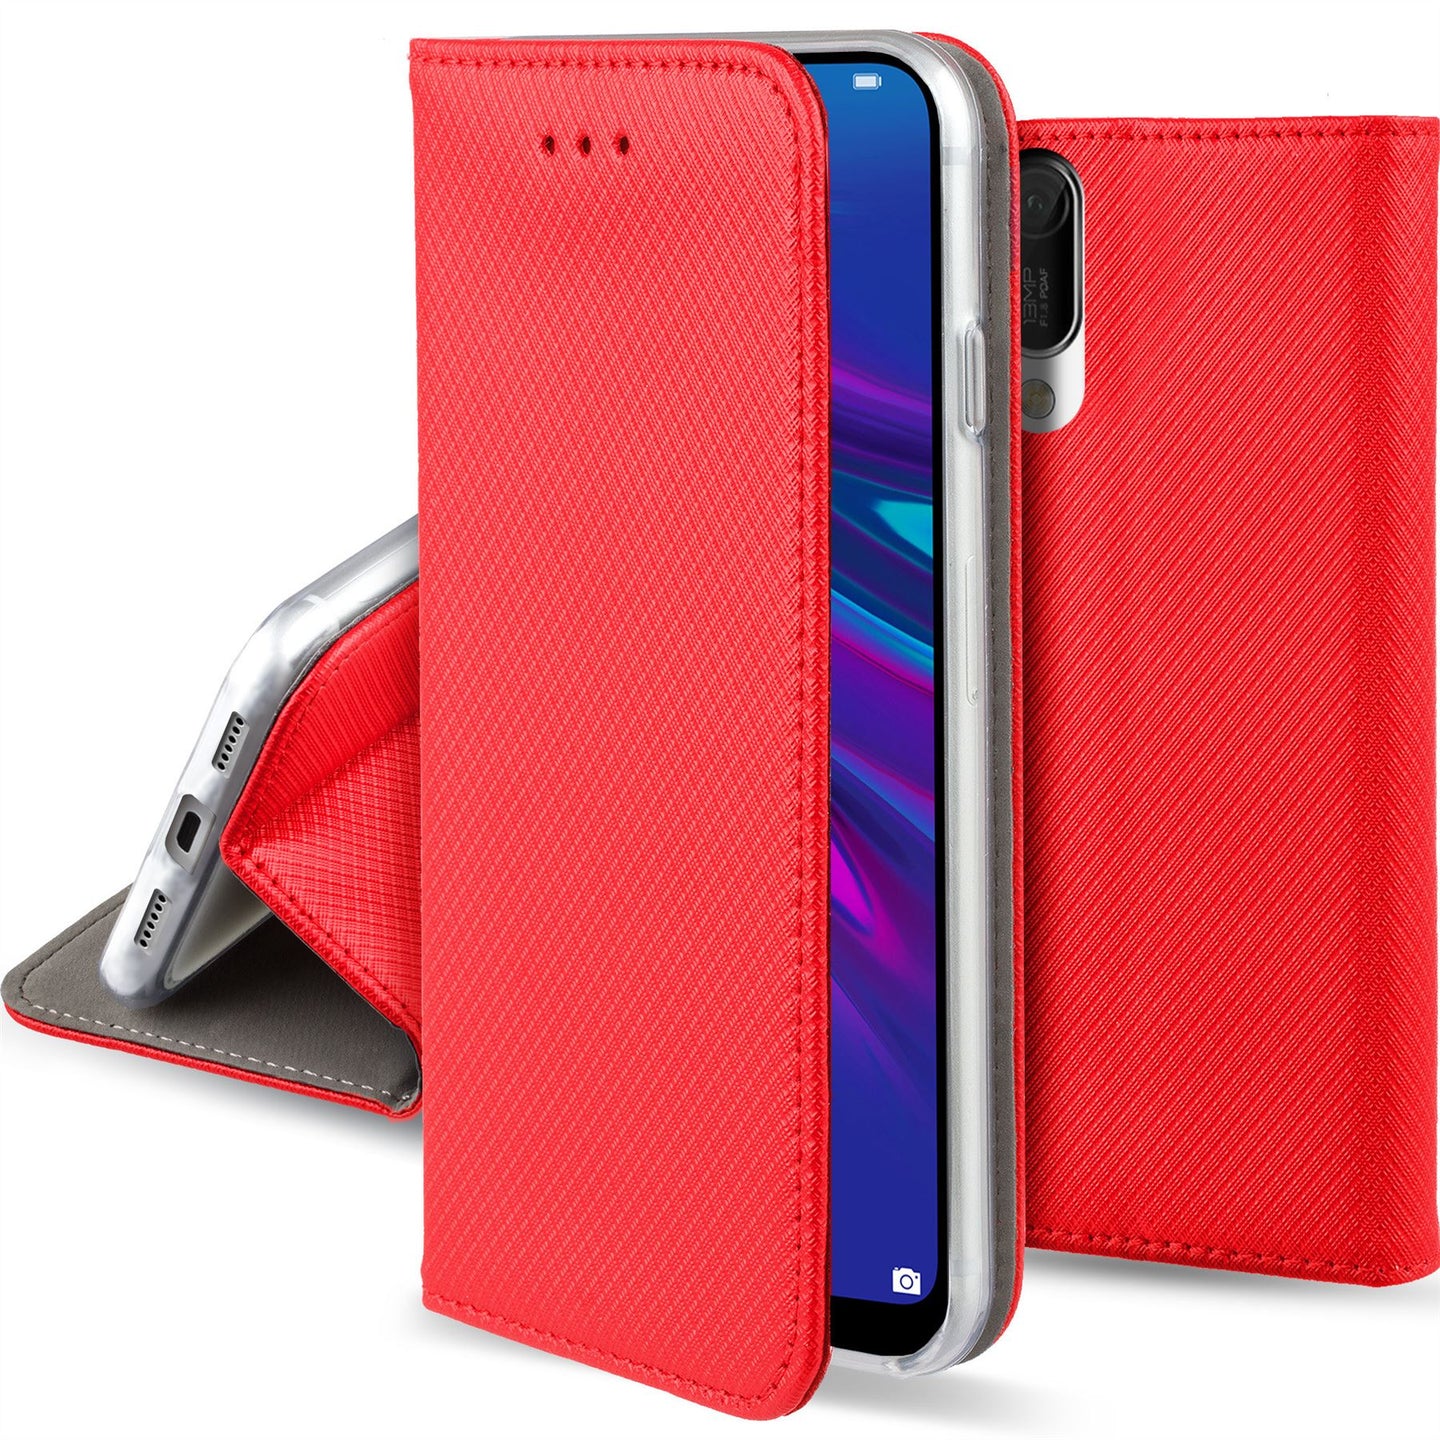 Moozy Case Flip Cover for Huawei Y6 2019, Red - Smart Magnetic Flip Case with Card Holder and Stand